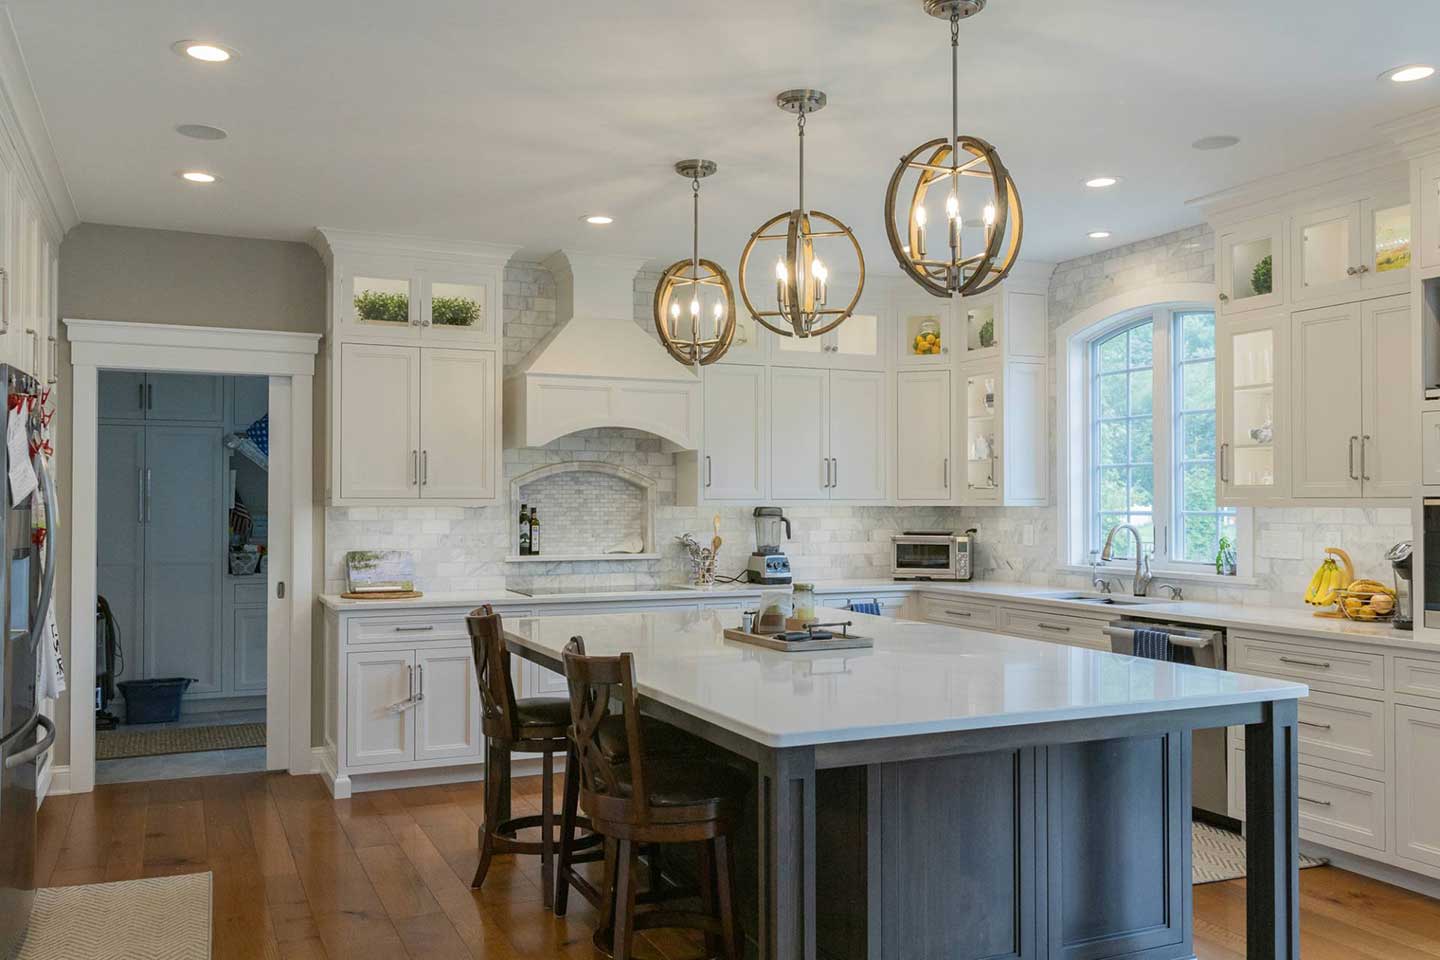 A local kitchen renovation featuring a large kitchen island performed by Lancaster contractors.